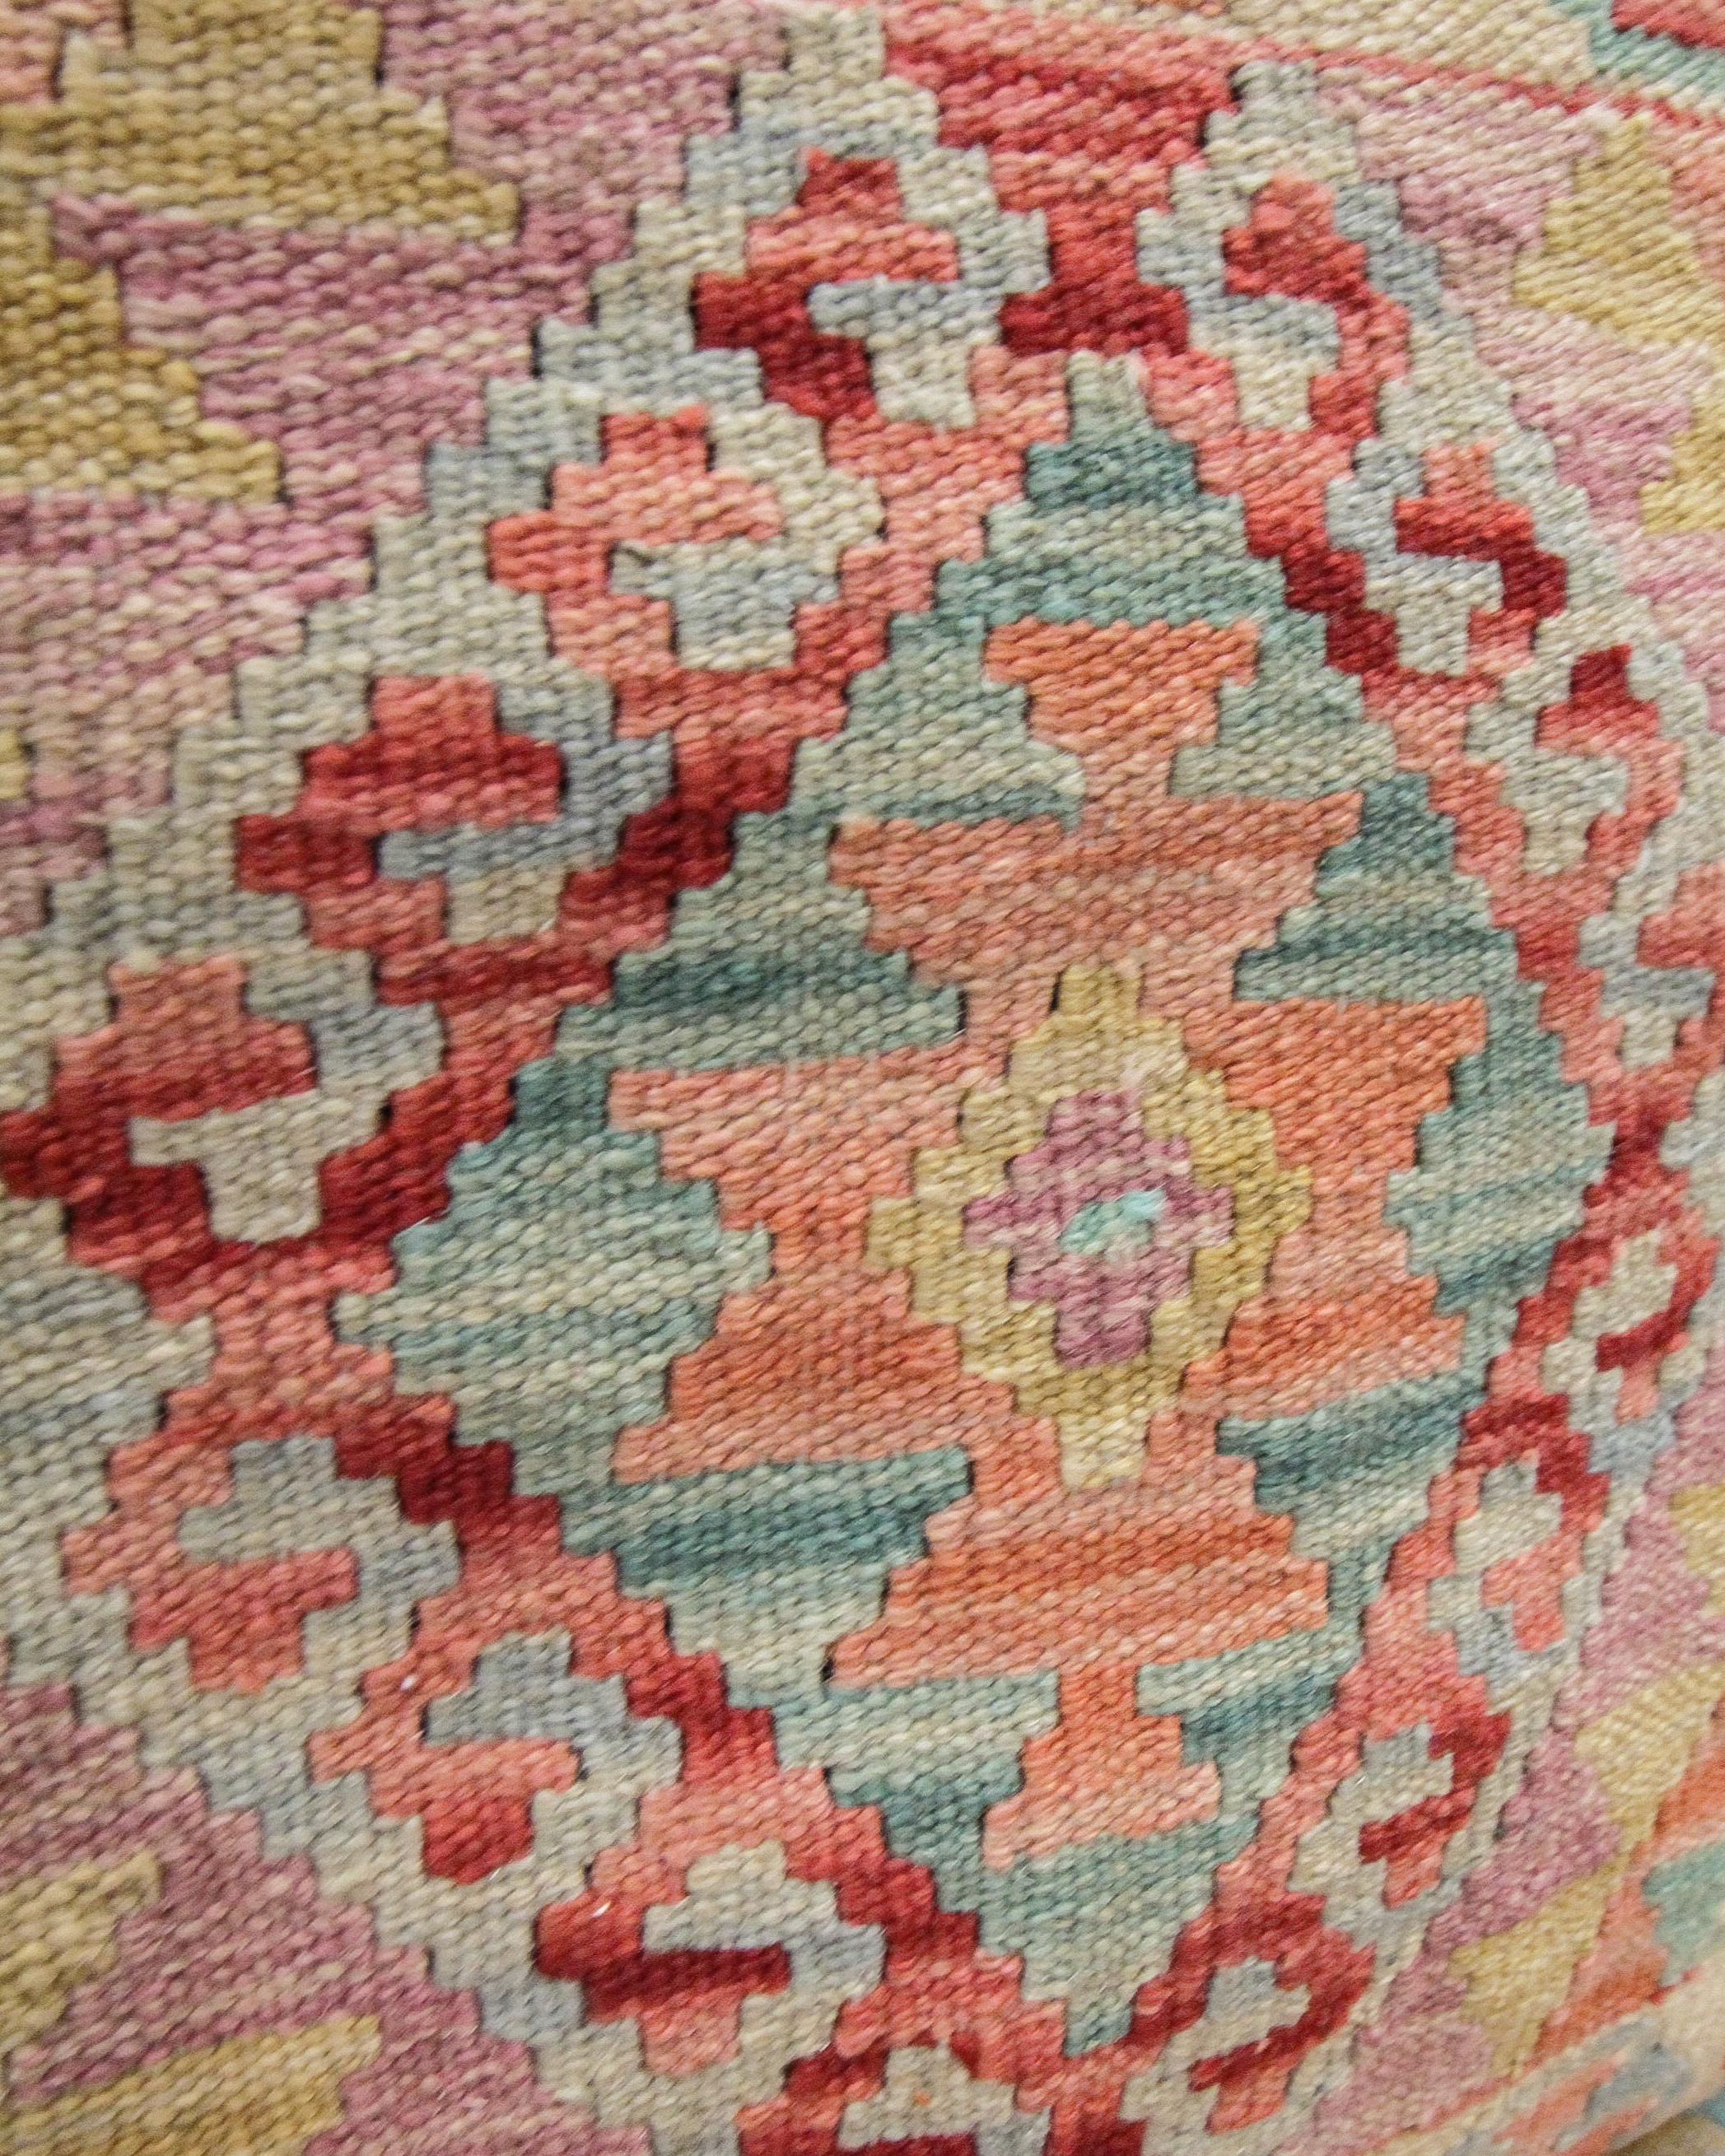 Vegetable Dyed Kilim Cushion Cover Rustic Beige Pink Wool New Handmade Scatter Pillow